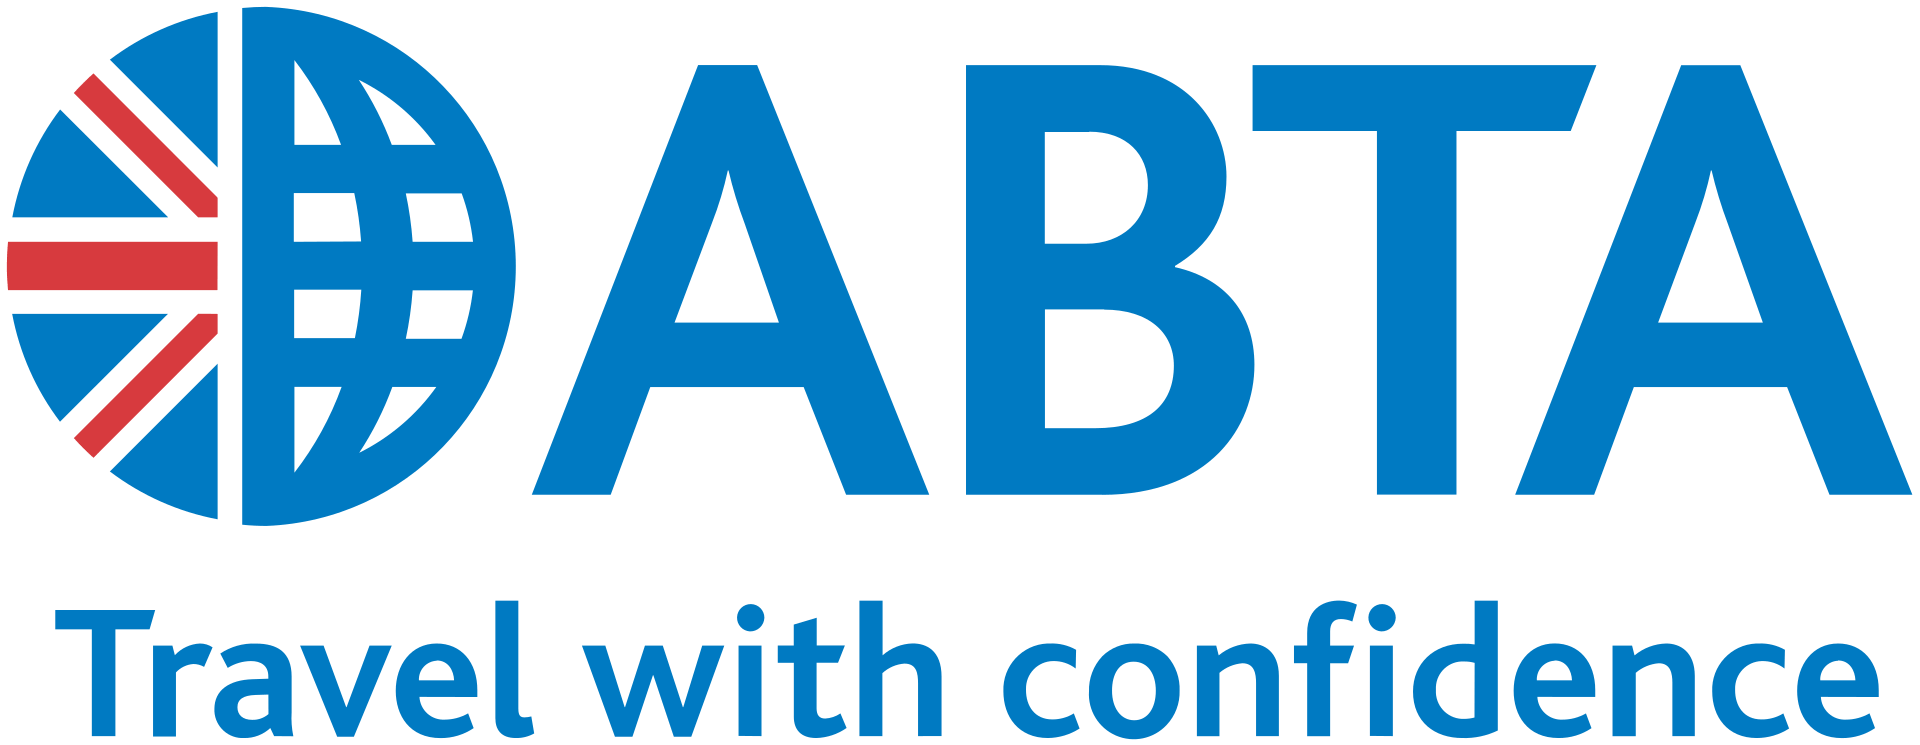 ABTA Travel with confidence